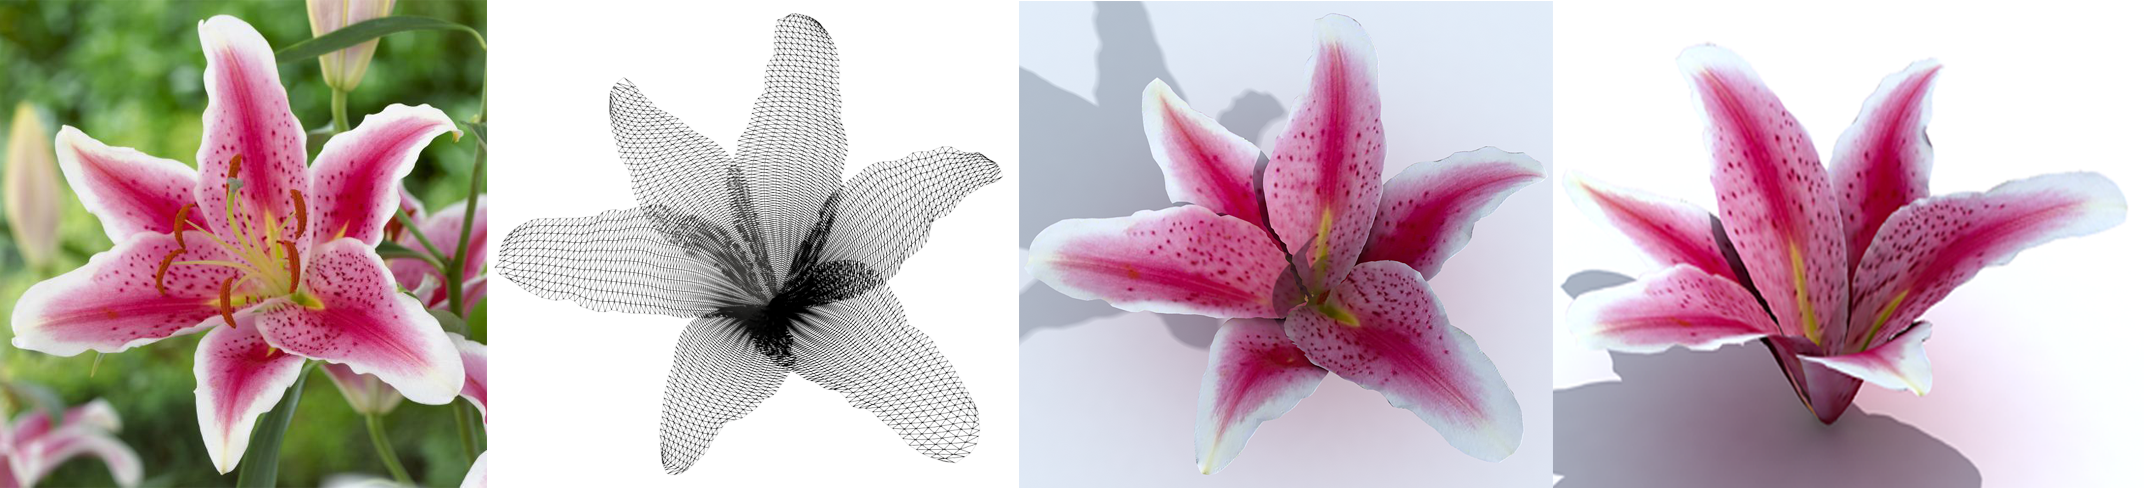 Teaser of Flower Reconstruction from a Single Photo